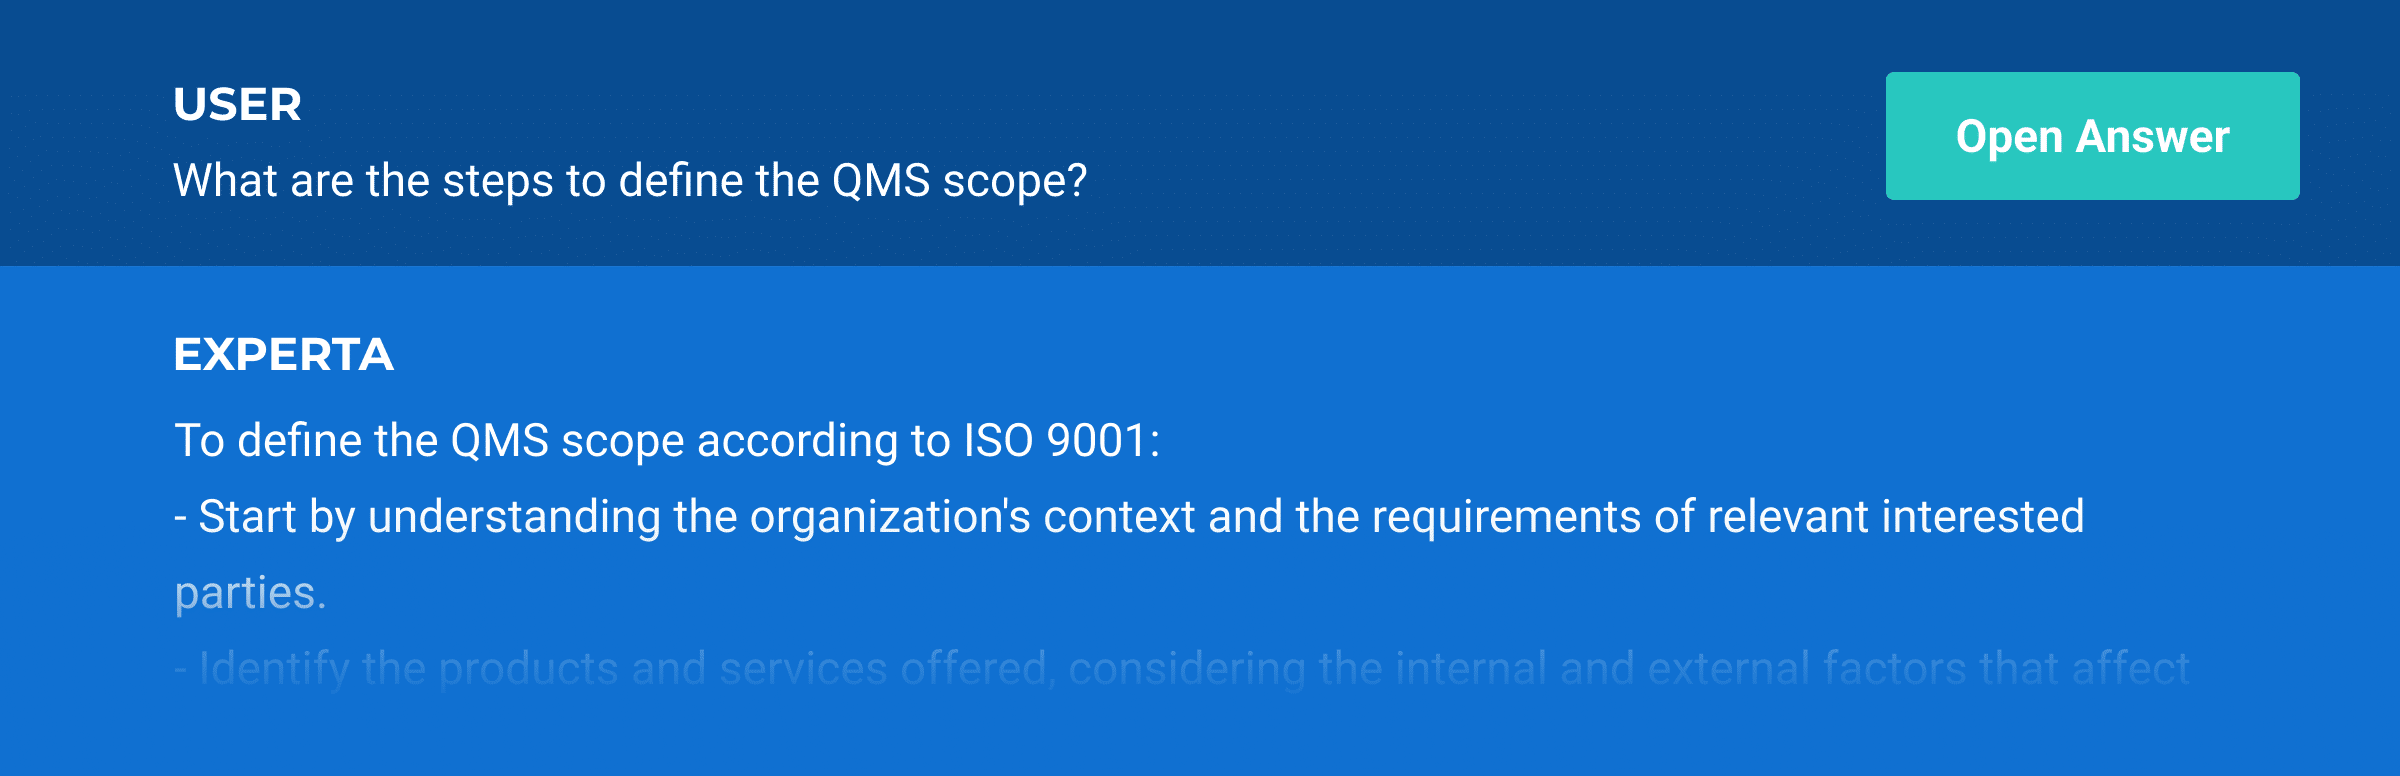 How to implement ISO 9001 using generative AI - Advisera